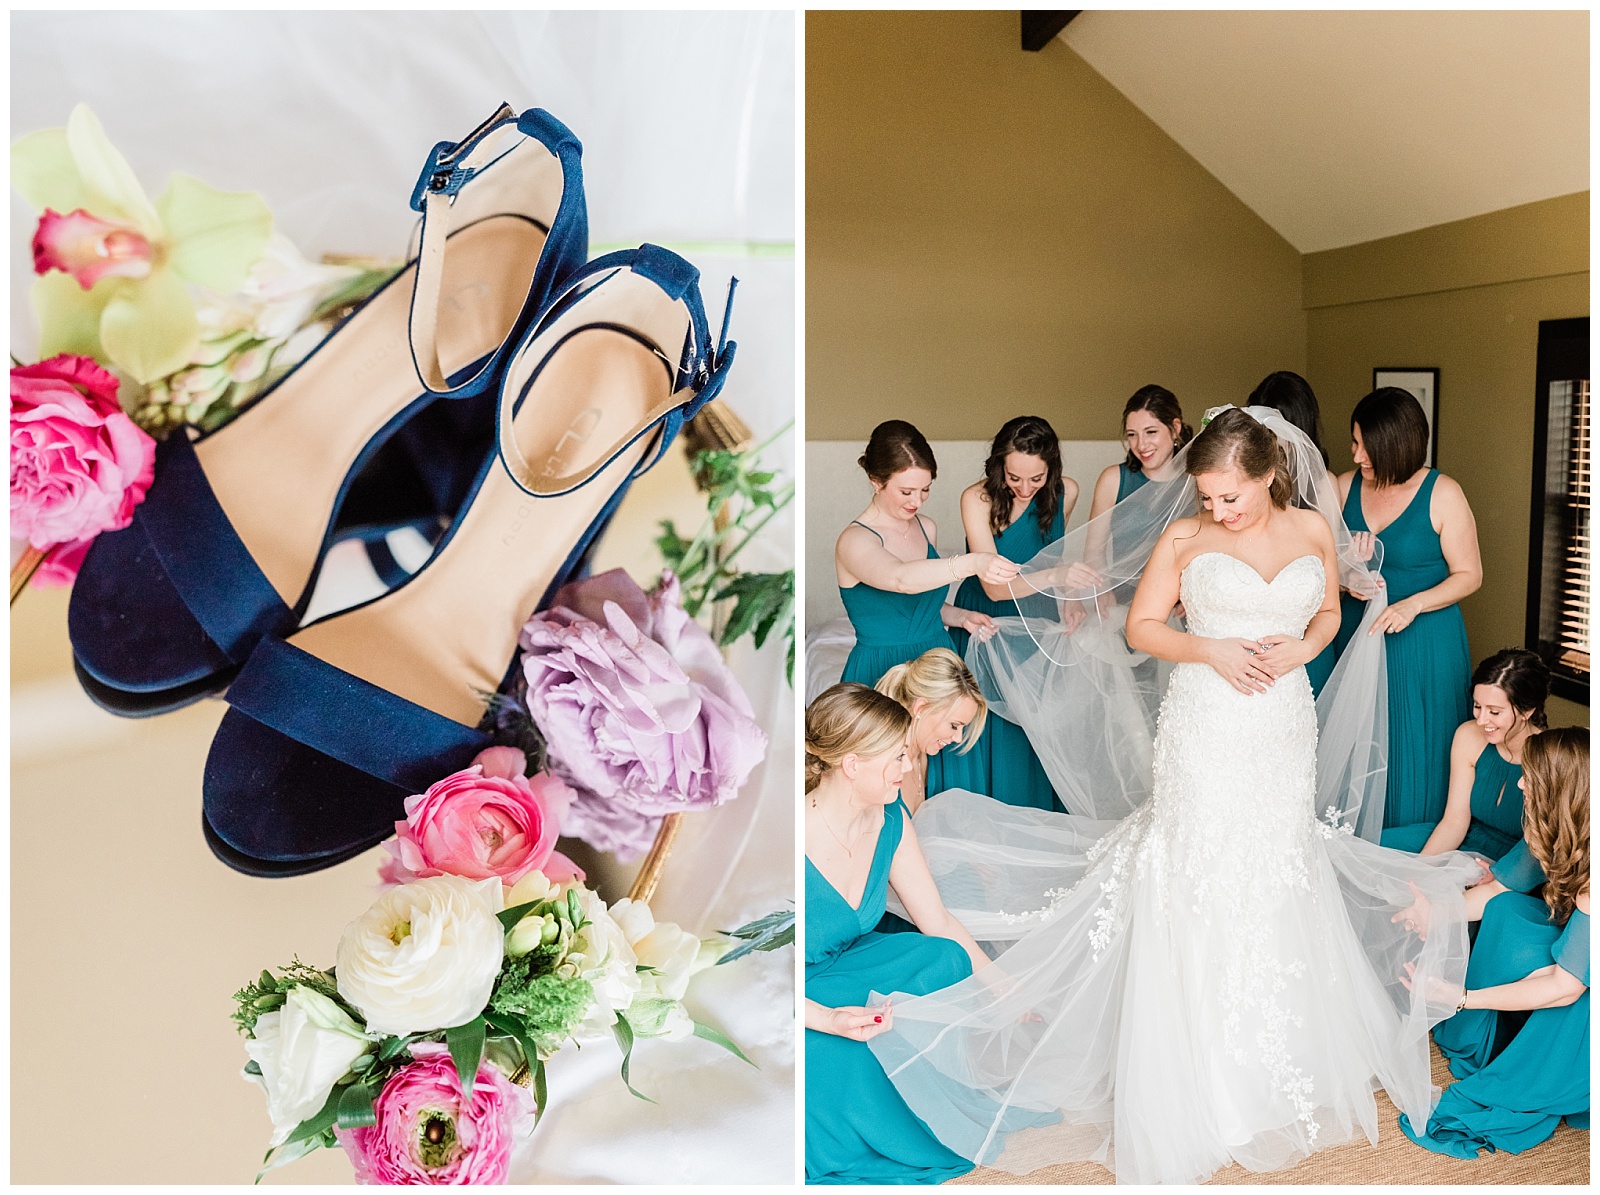 Wedding shoes and florals next to bridesmaids helping the bride with her wedding gown.